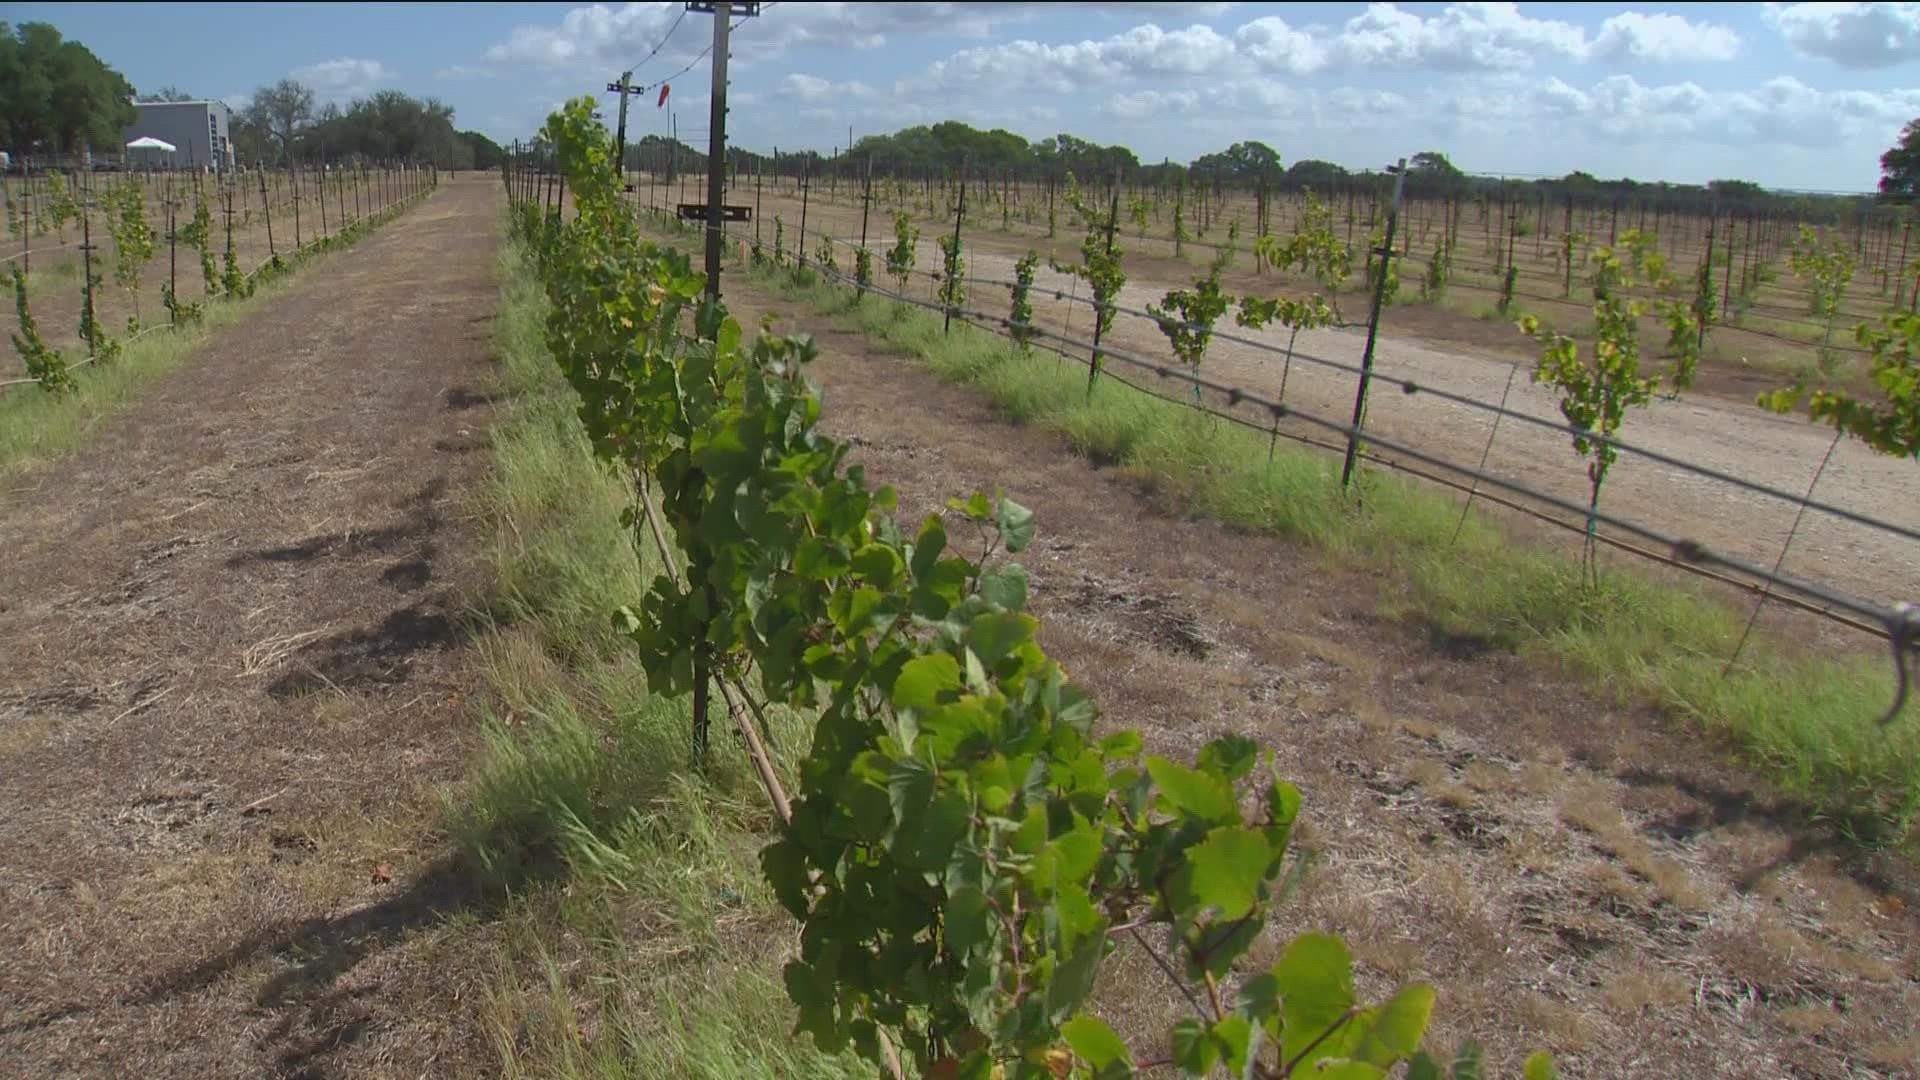 At Solaro Estate Winery, they've felt the effects of hot and dry conditions. After losing some vines, they're changing the way they plant their grapes.